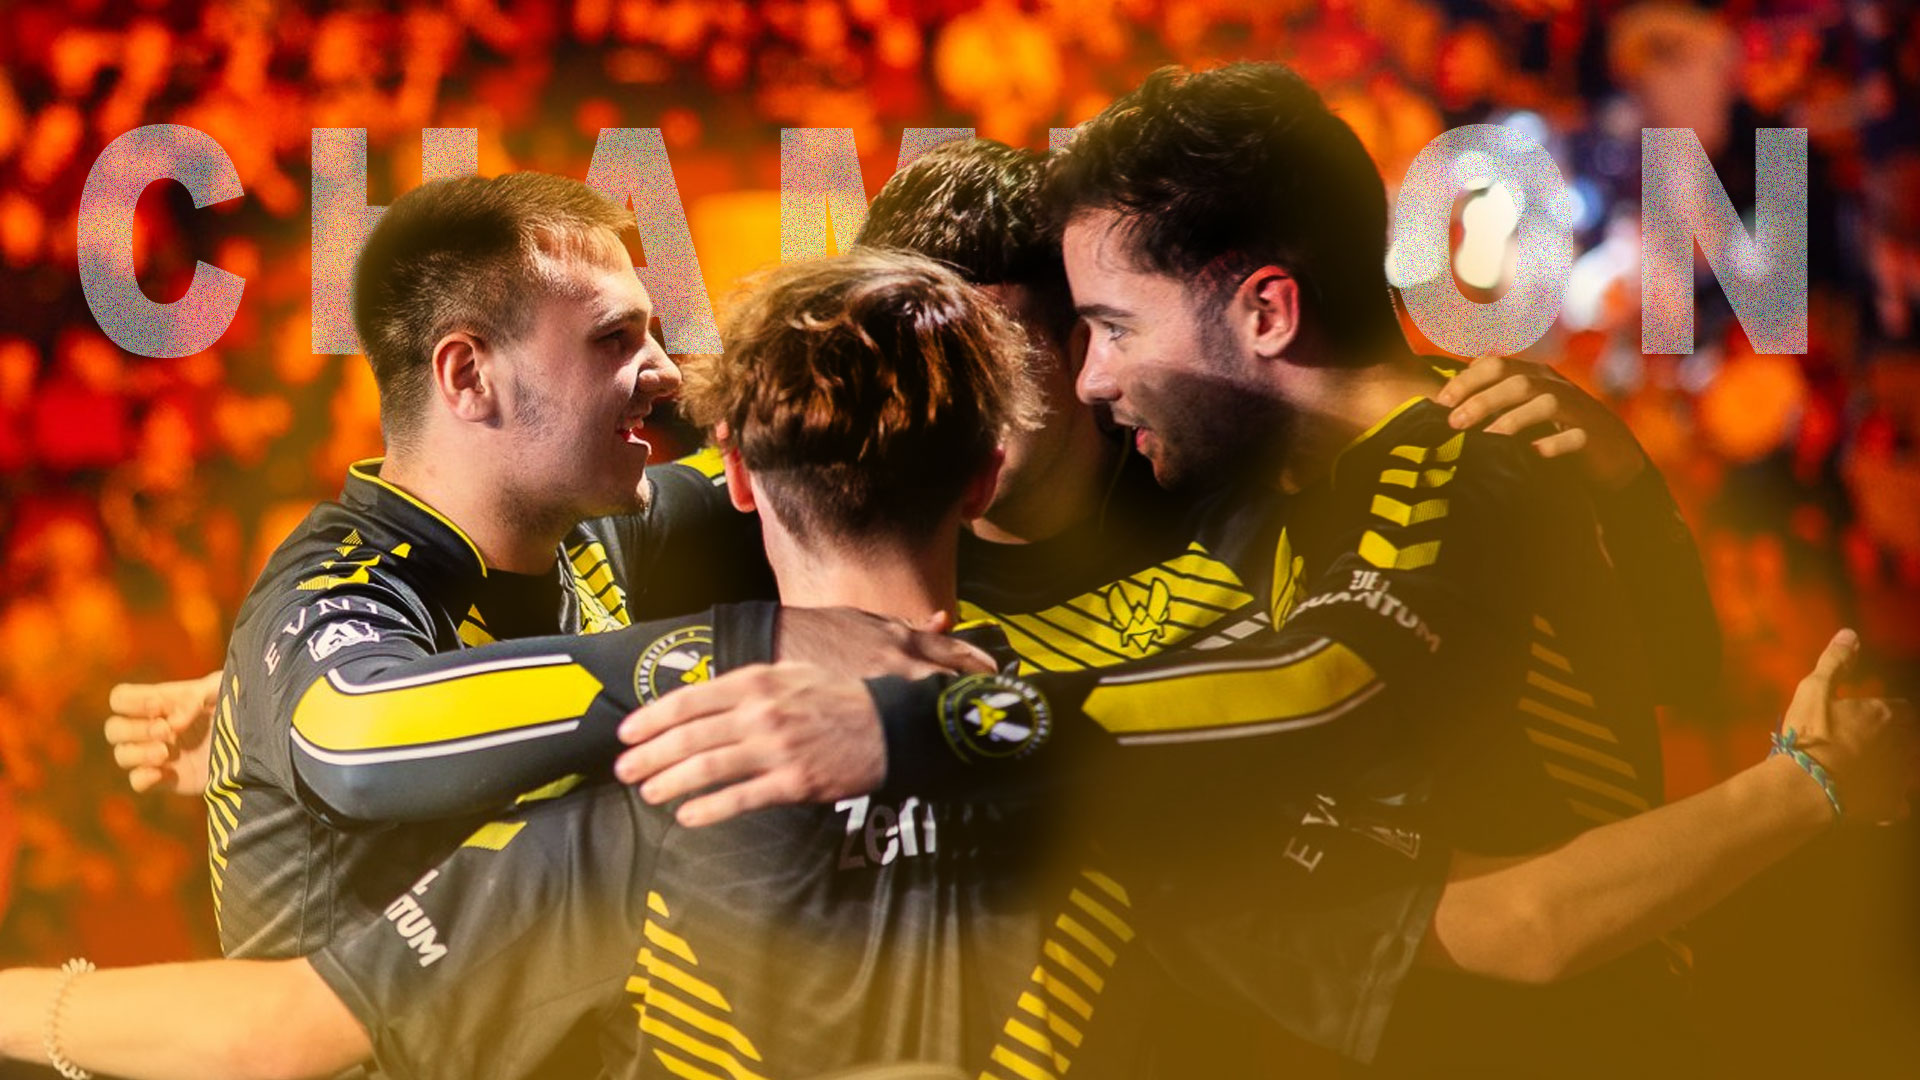 Team Vitality wins the RLCS Spring Major after an impressive lower